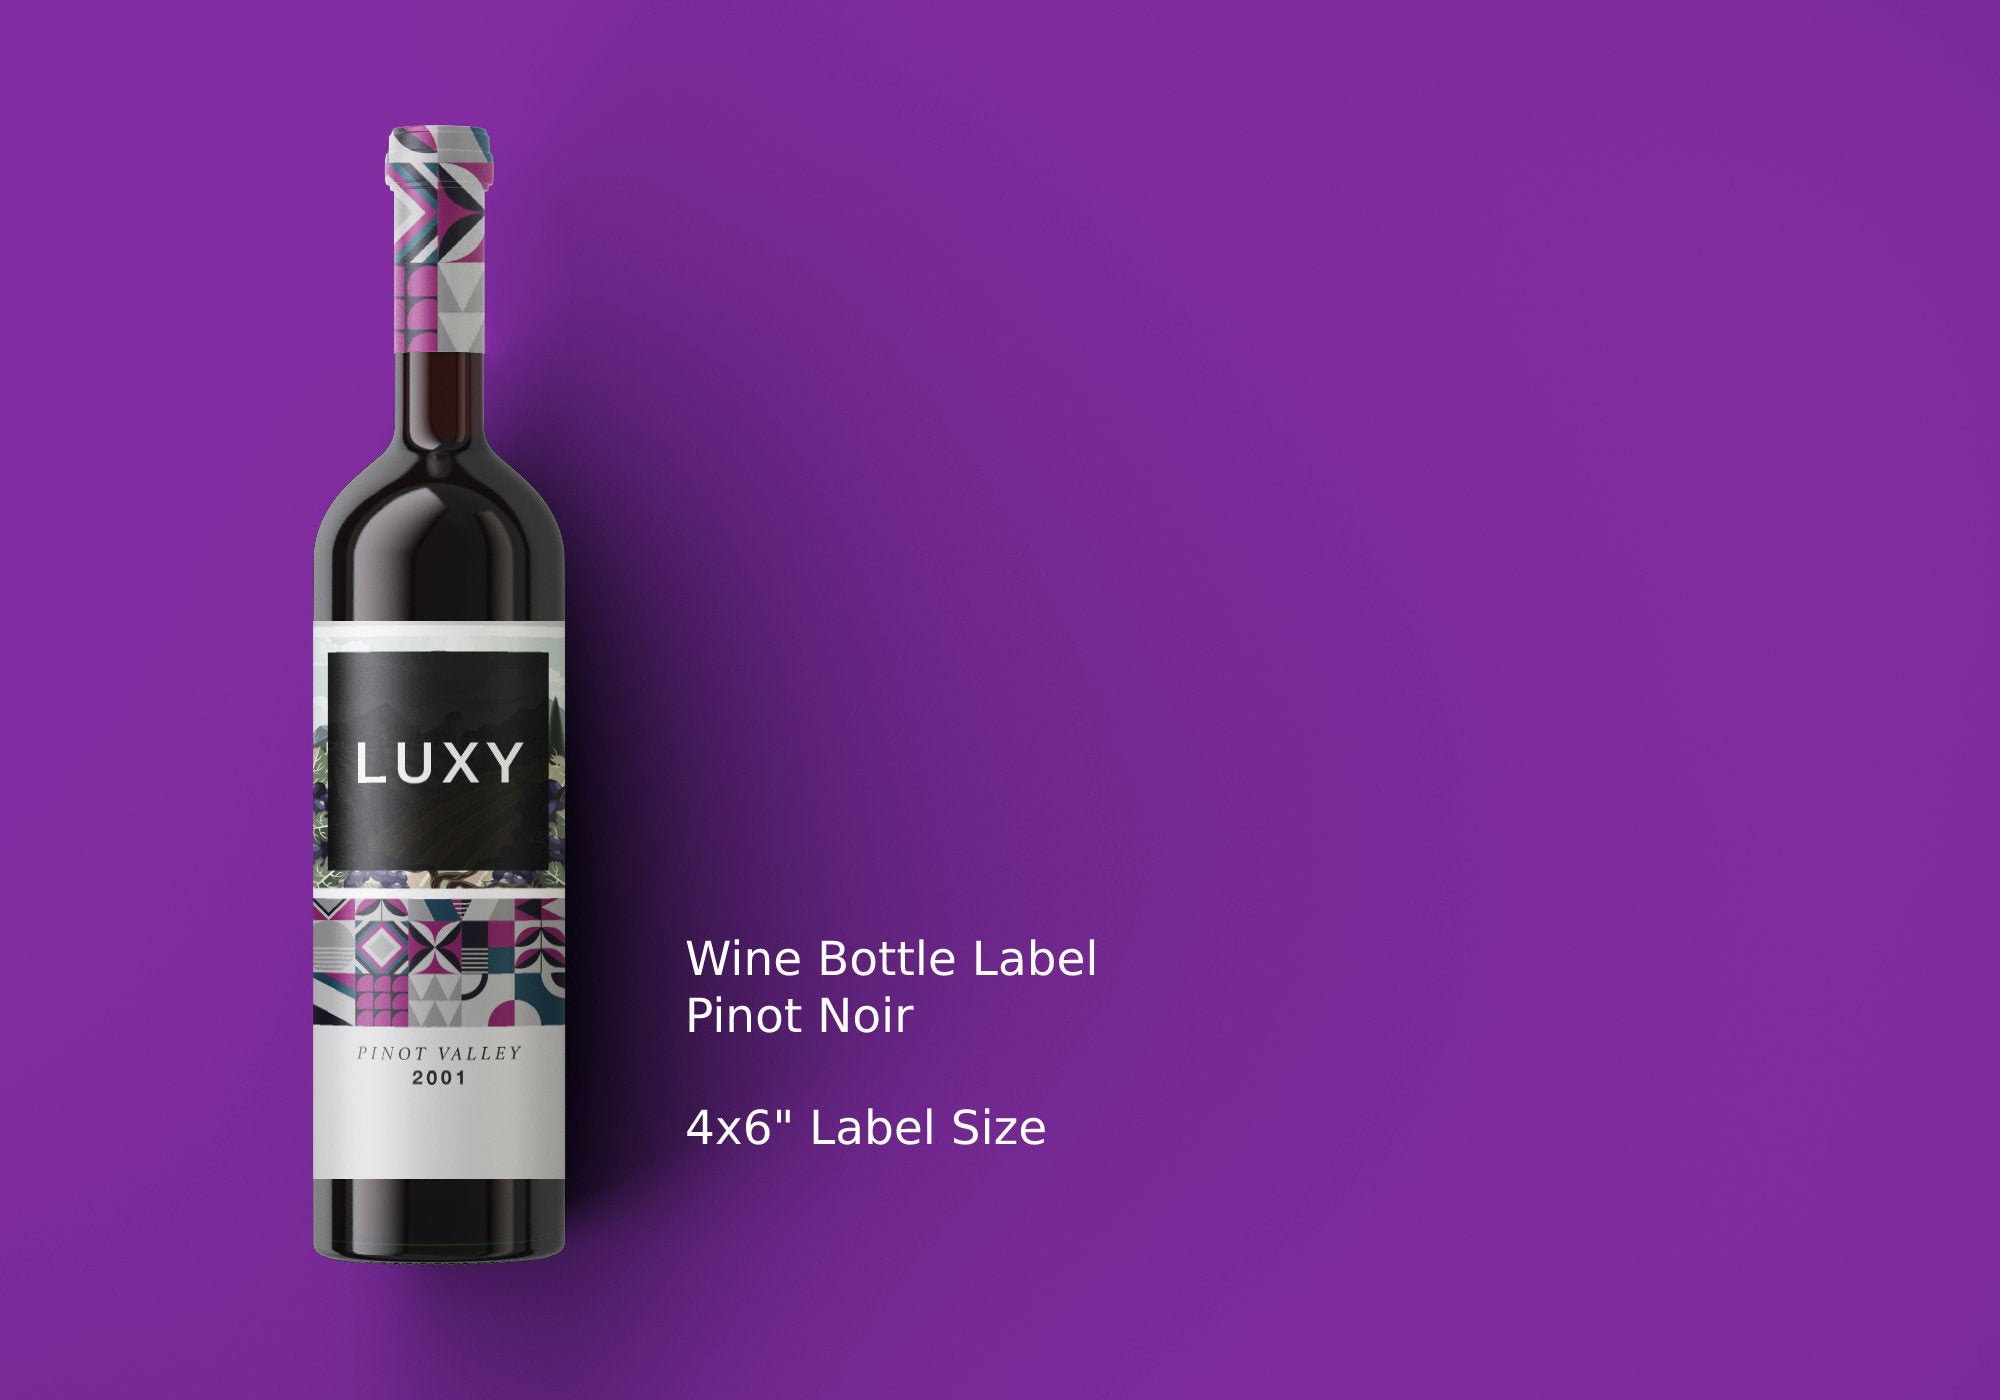 Custom Red Wine Bottle Label Design Template 4x6 Inches Tall Bottle Colourful and Sleek Silver Graphic Packaging Design Sticker White Rose